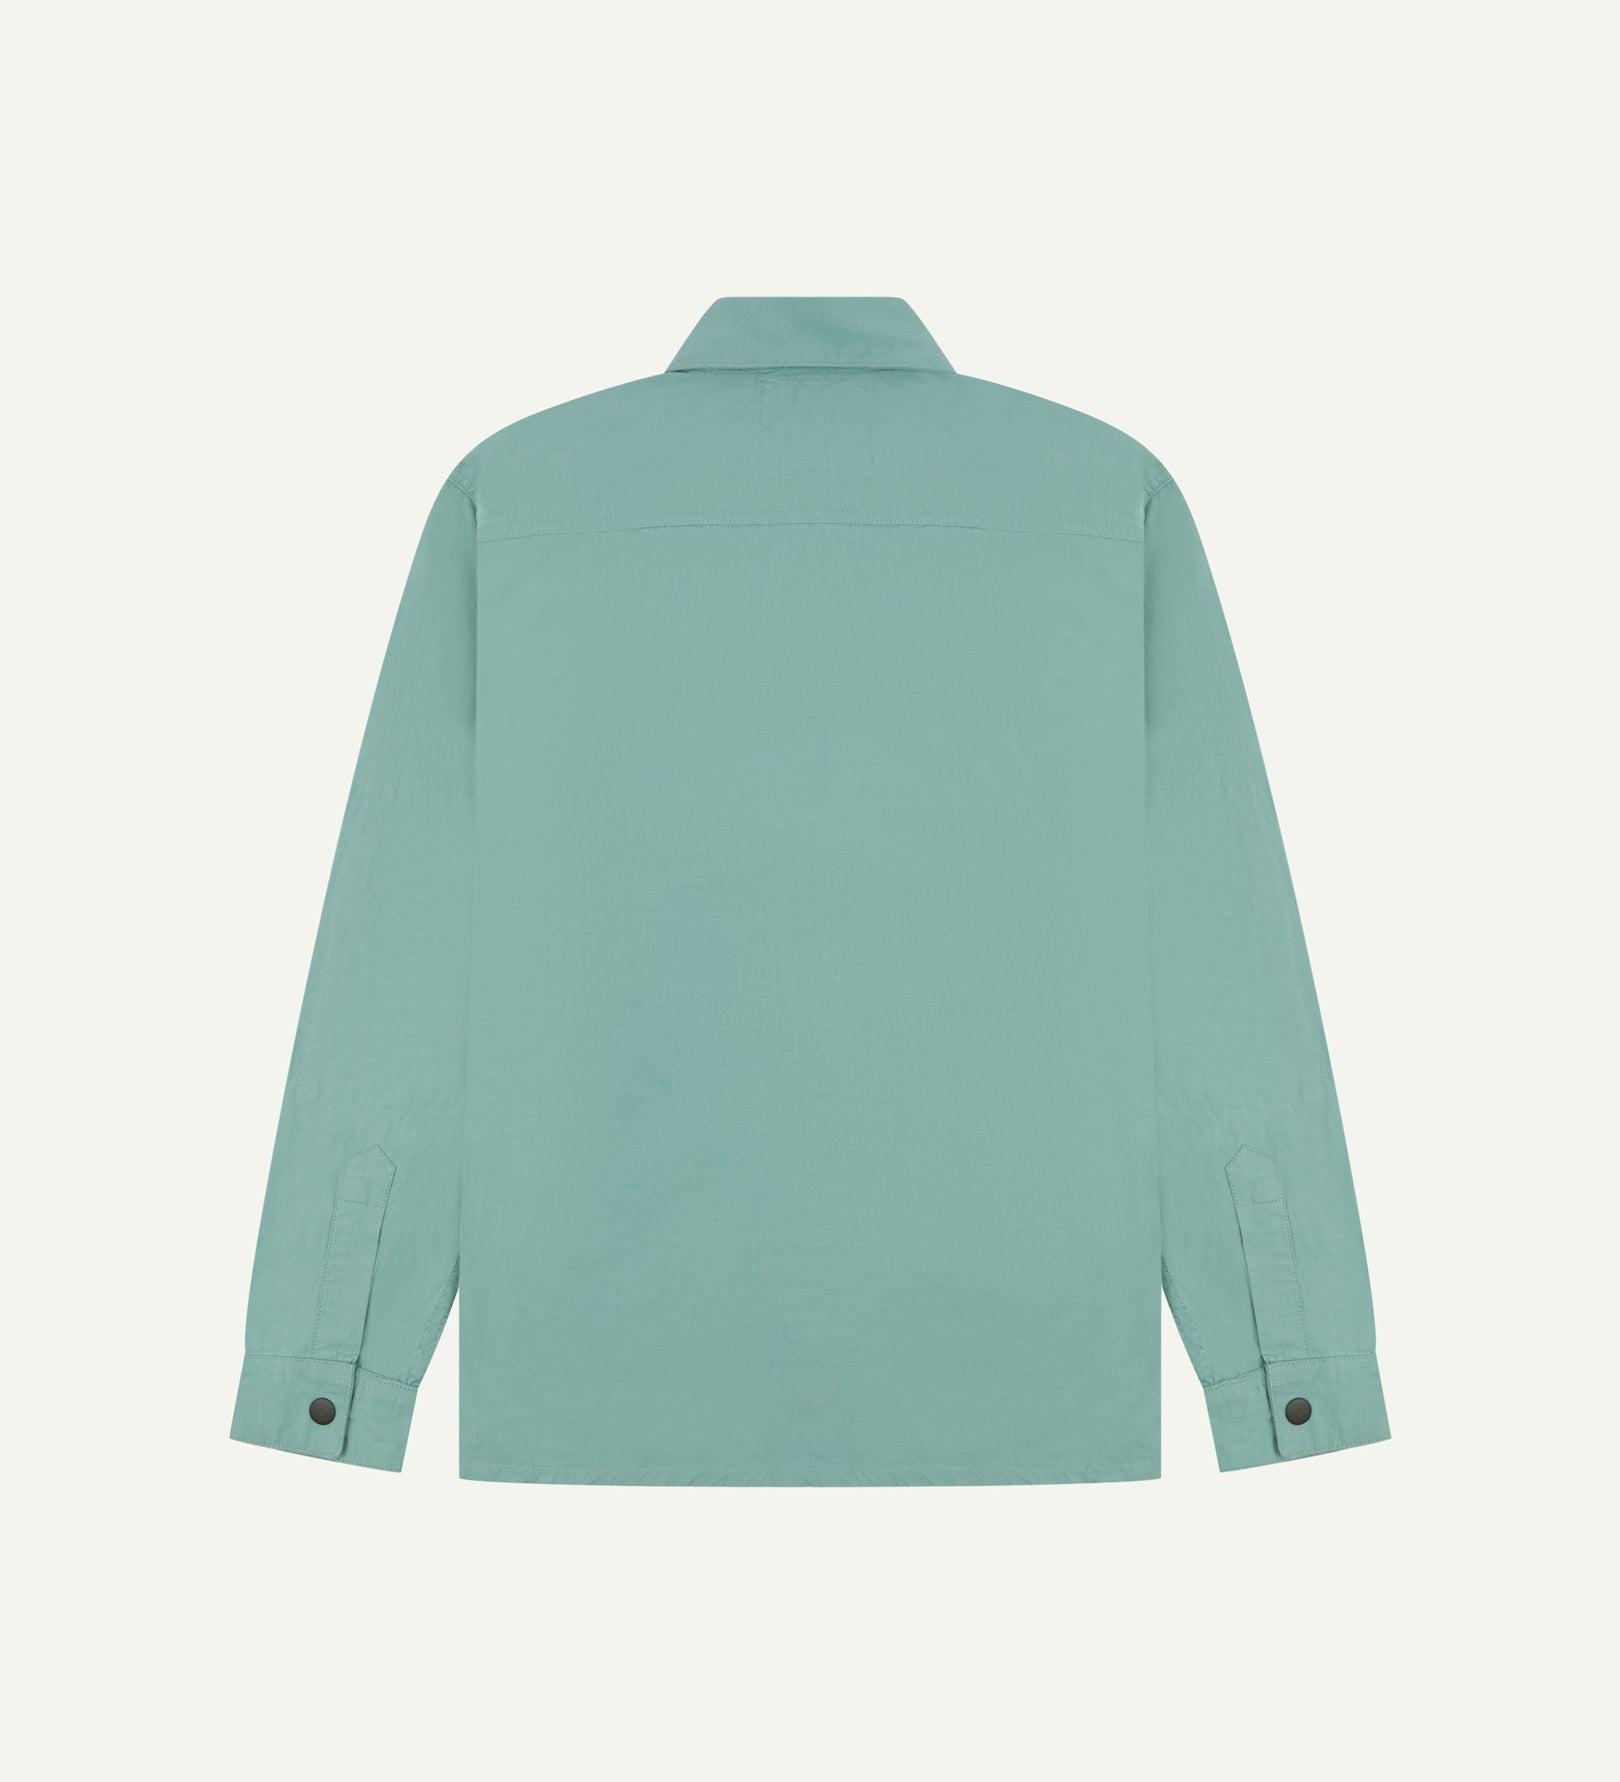 Reverse view of the blue-green 'eucalyptus' coloured, lightweight zip-front jacket showing reinforced elbows, boxy silhouette and 'popper' cuffs.